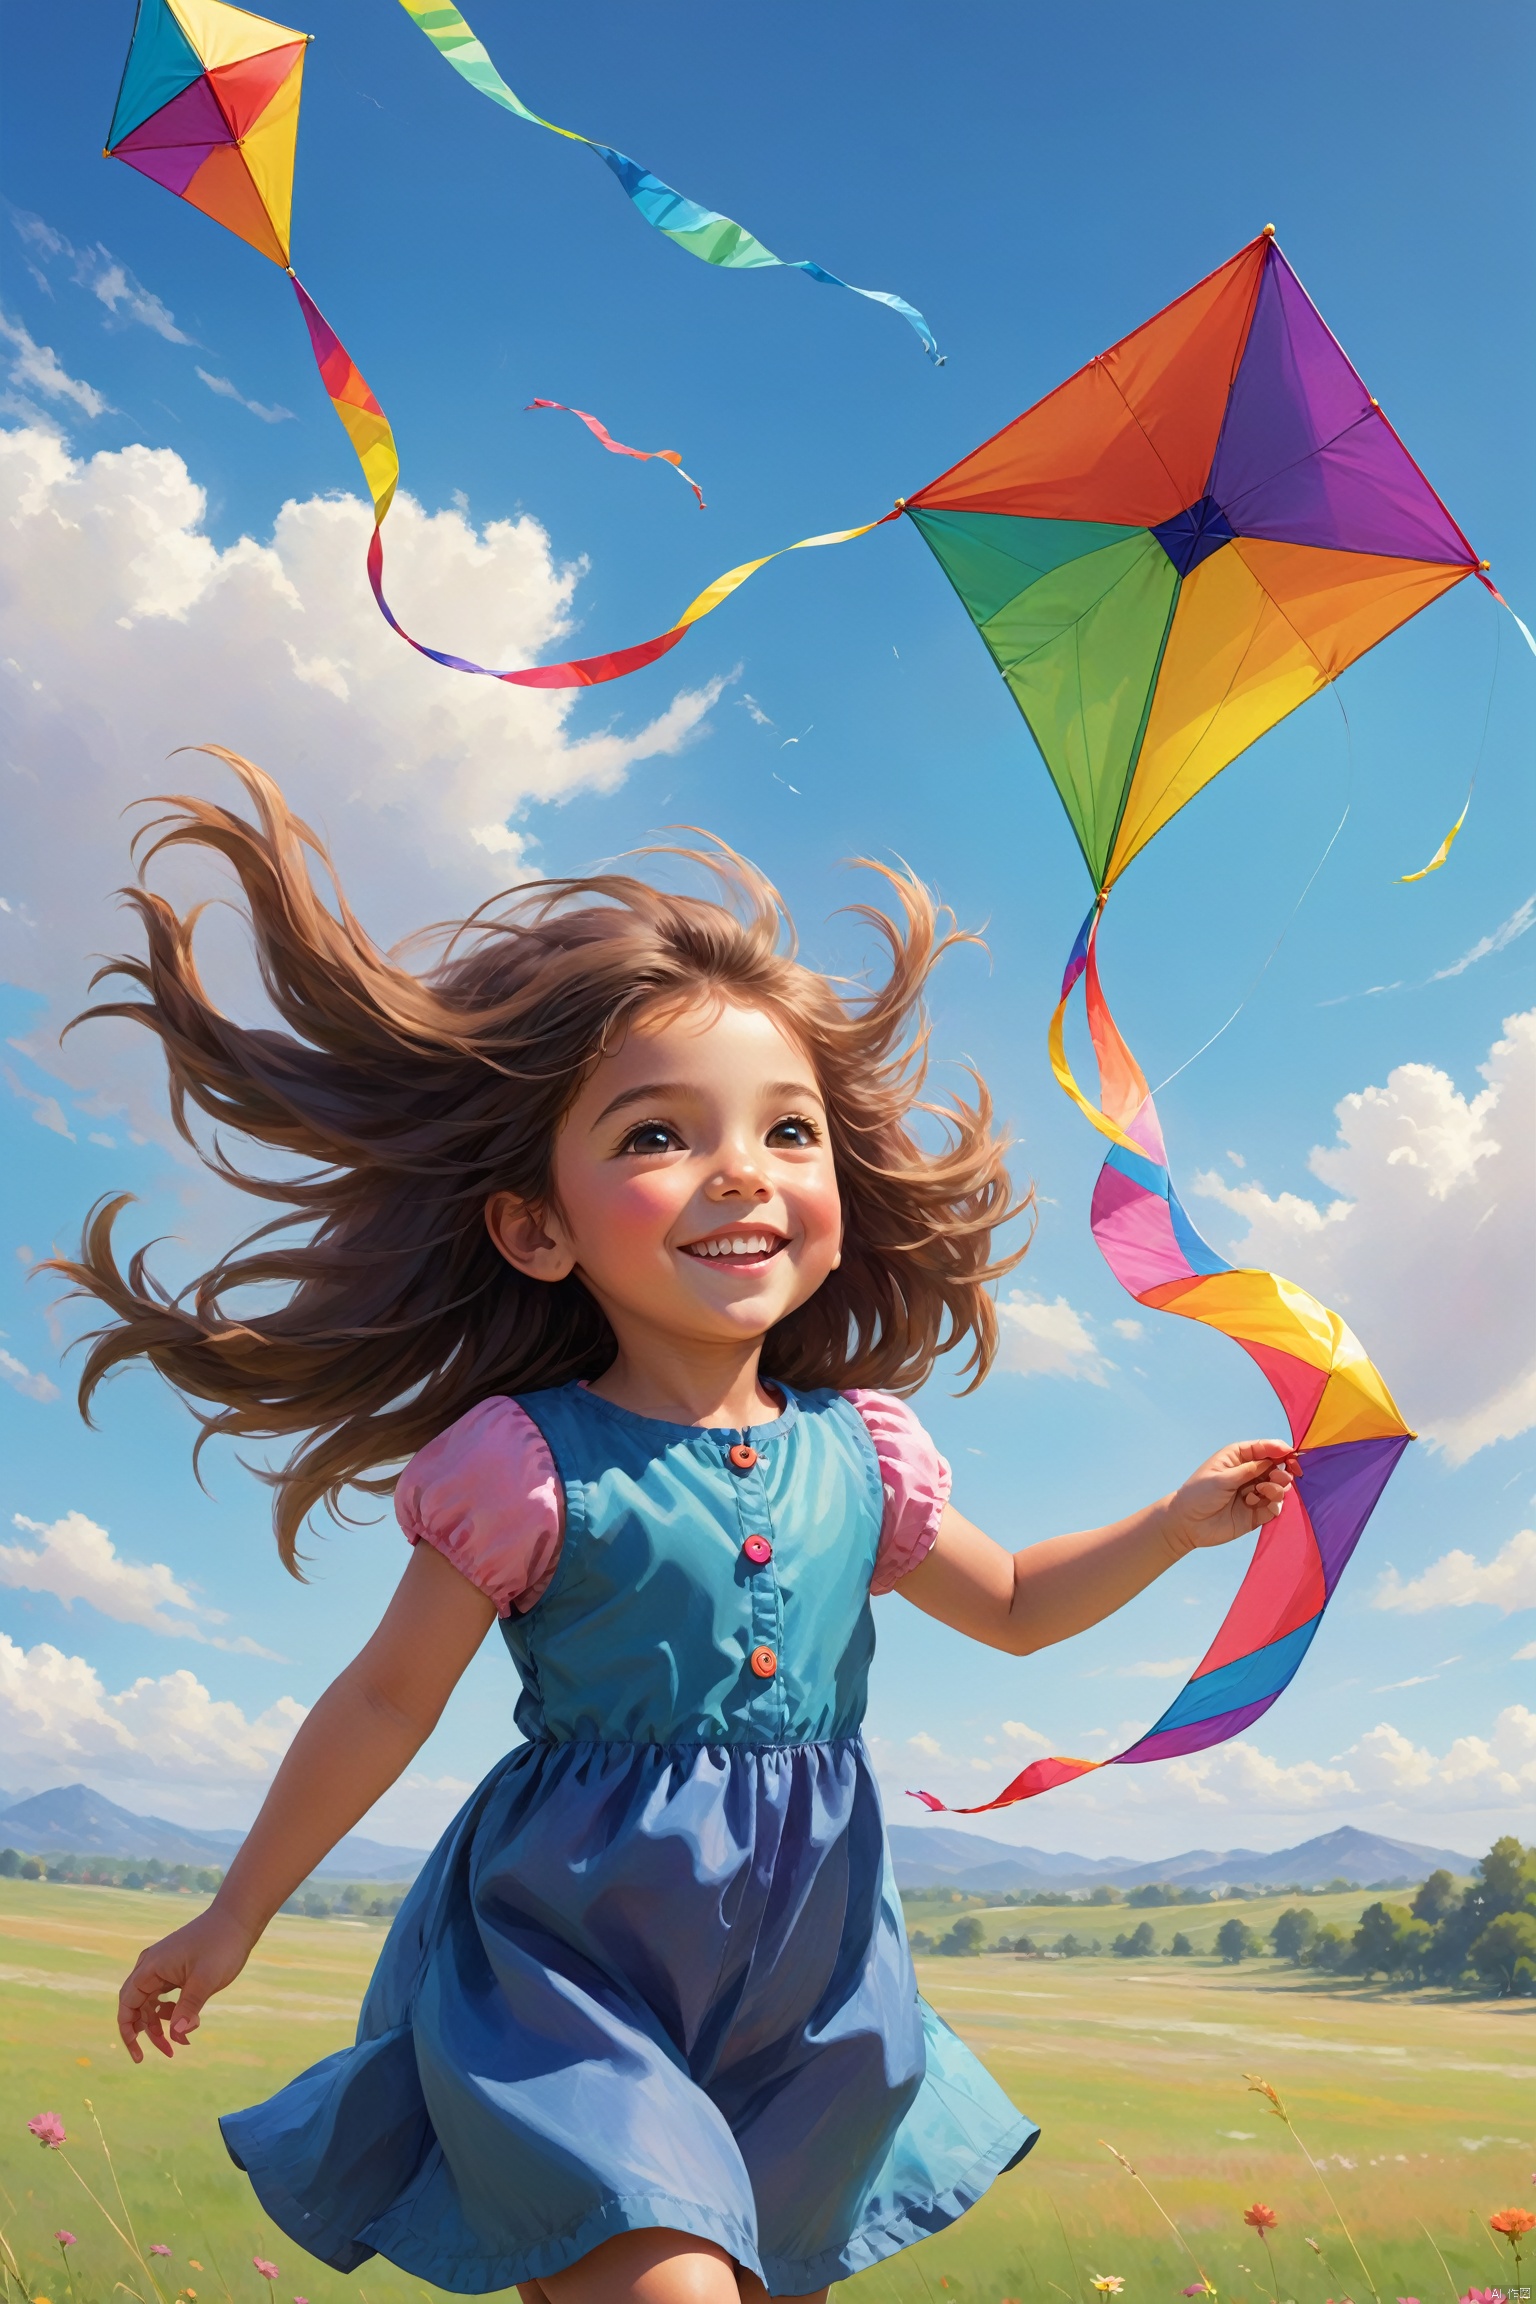 On a tranquil field, a little girl flies a colorful kite. Her hair flutters gently in the breeze, and her face is filled with a smile of freedom. The kite soars in the blue sky, forming a harmonious scene with the surrounding natural landscape.